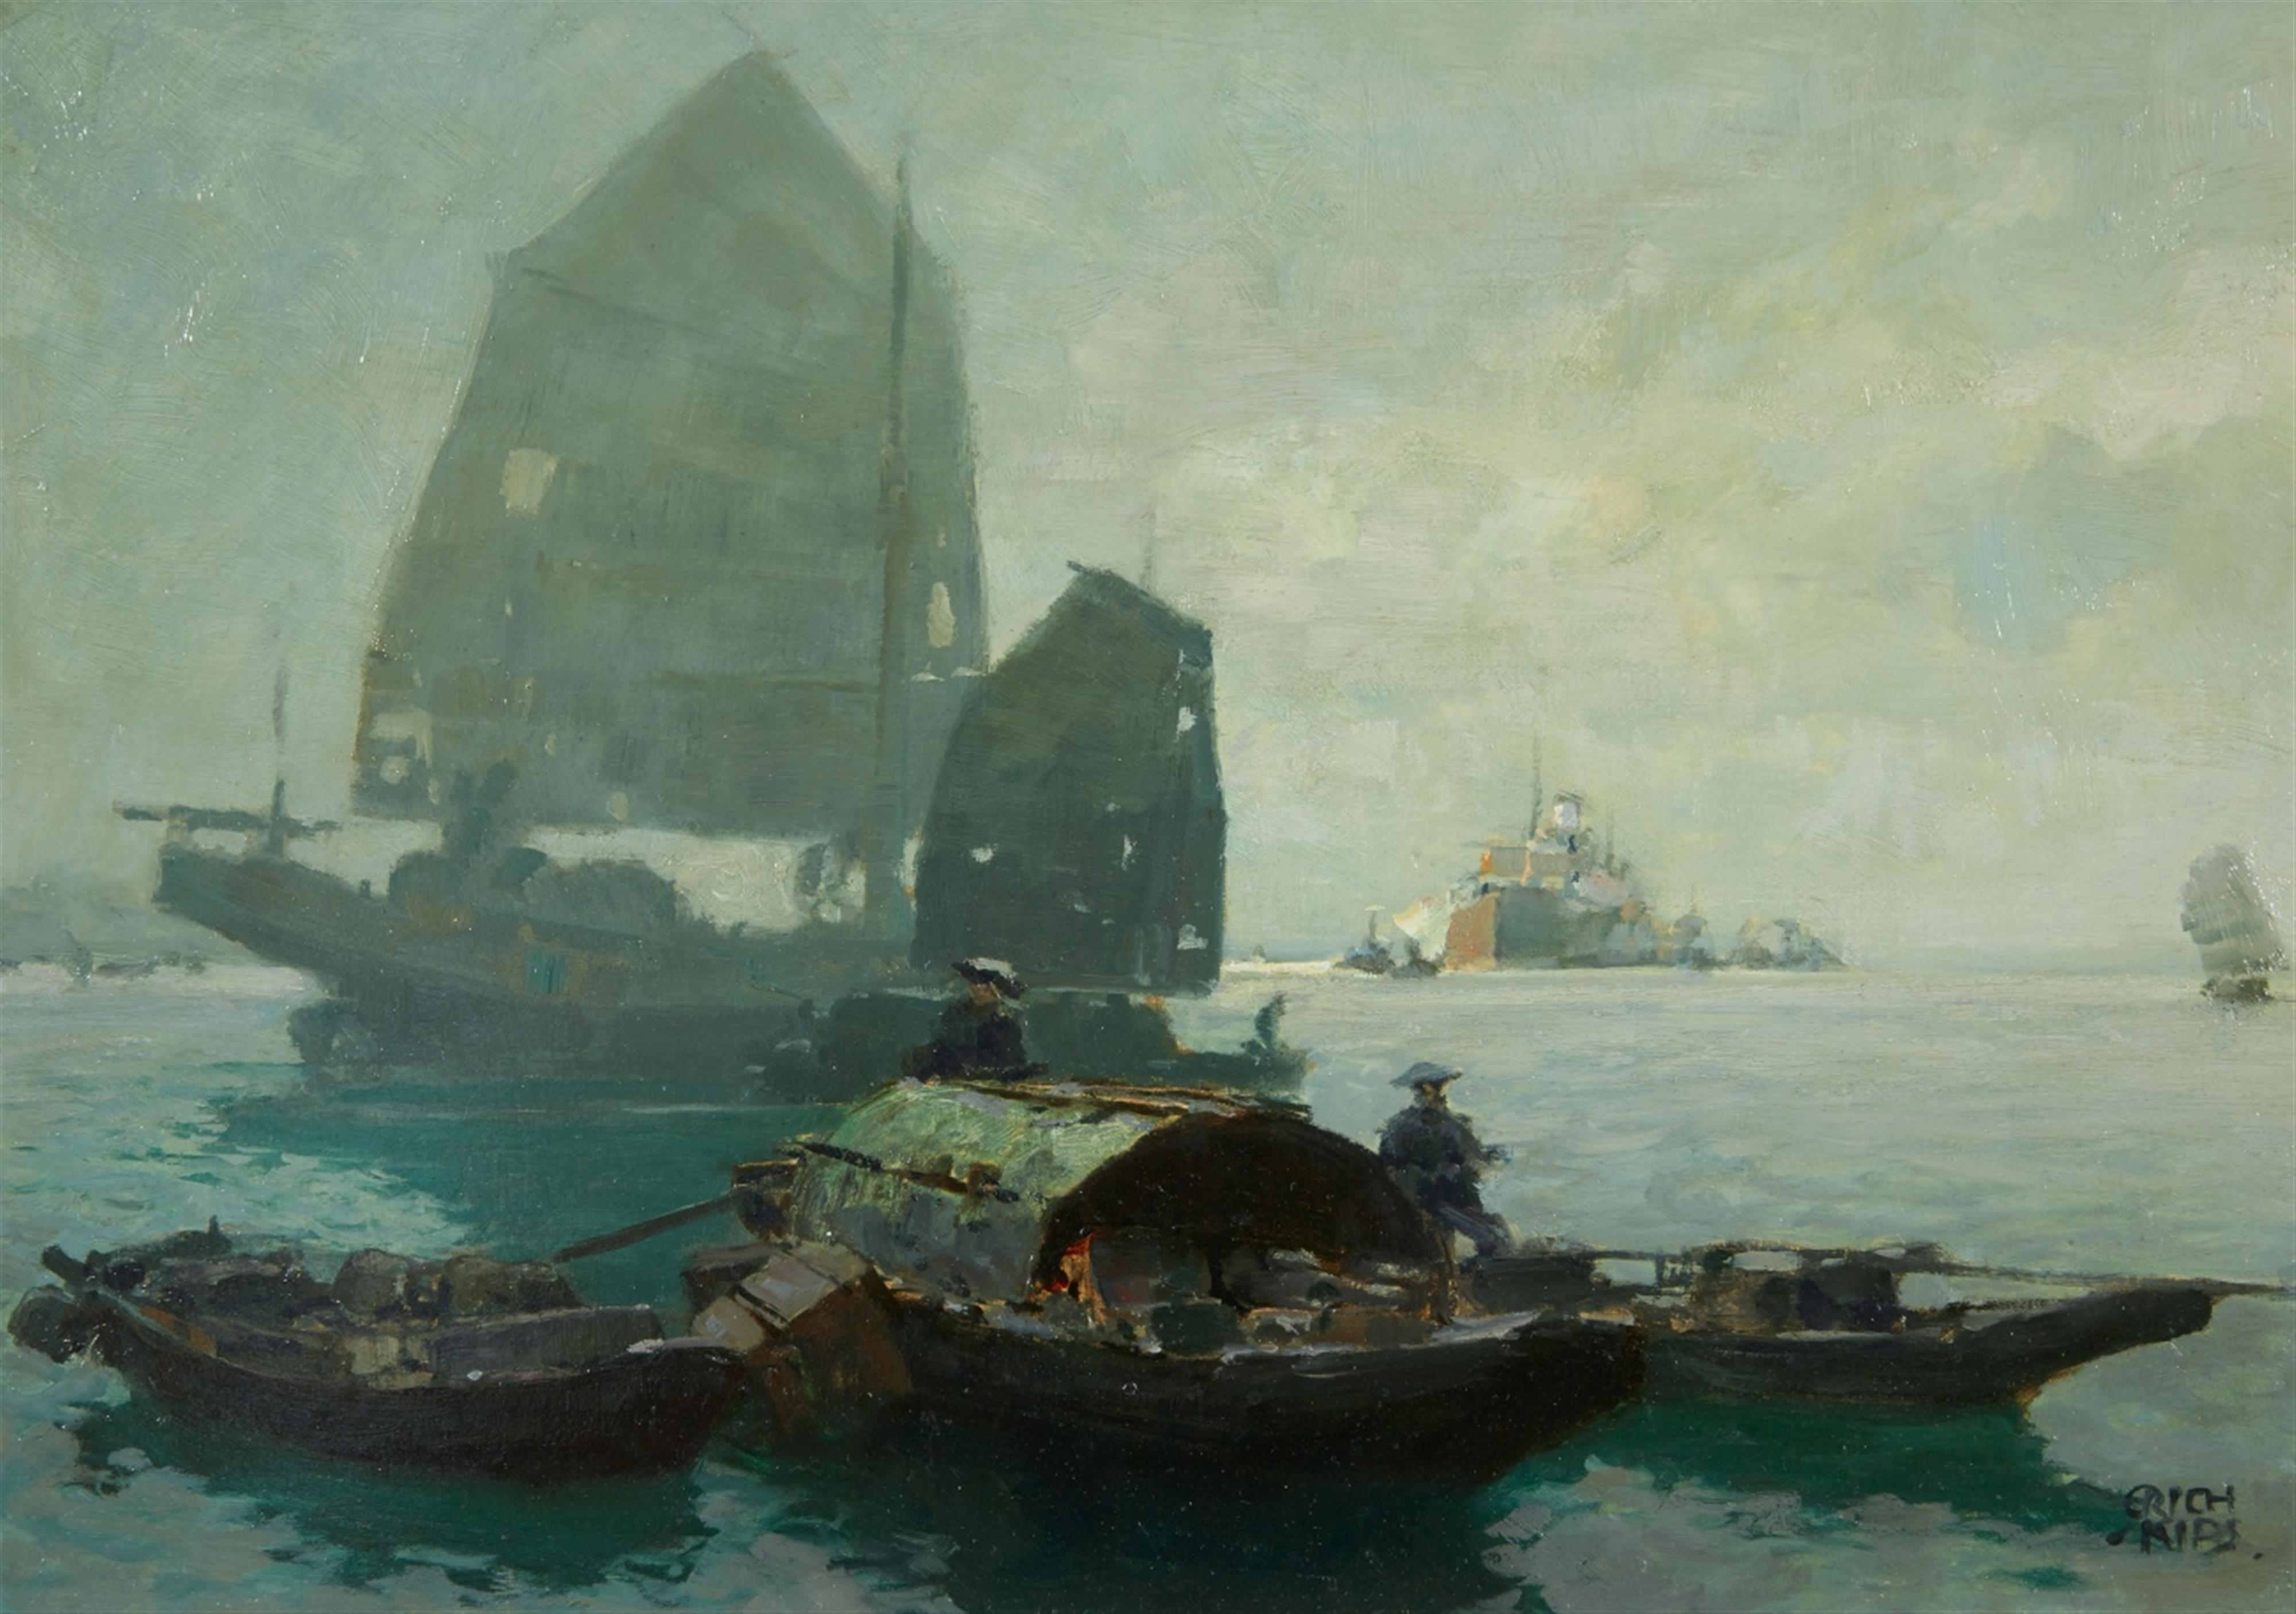 Erich Kips - A View of the Harbour of Hong Kong - image-1